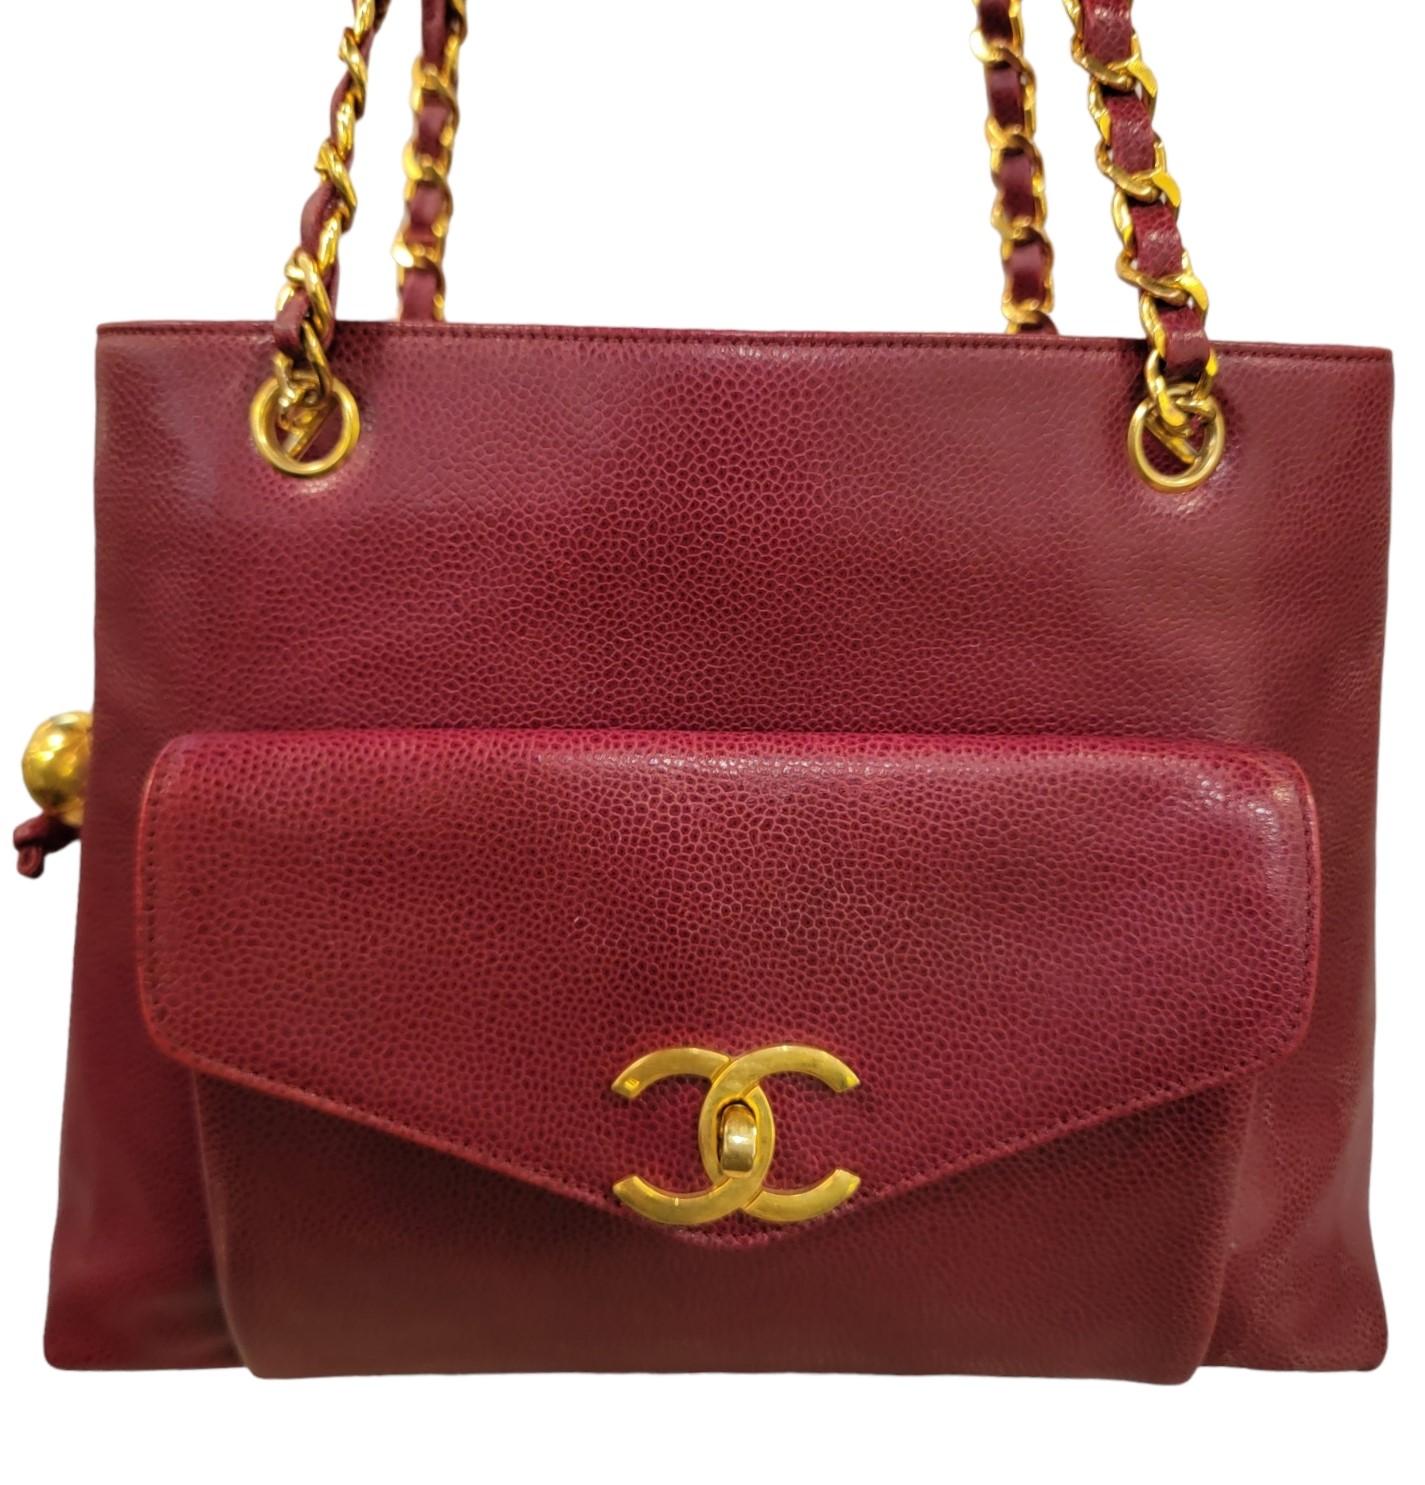 Vintage Chanel CC Rare Caviar Leather Shoulder. 

Chanel CC Rare Caviar Leather Shoulder. Winderful red caviar leather with gold accents. CC buckle in the front pocket gold and leather shoulder straps. This bag has 3 larger compartments within the